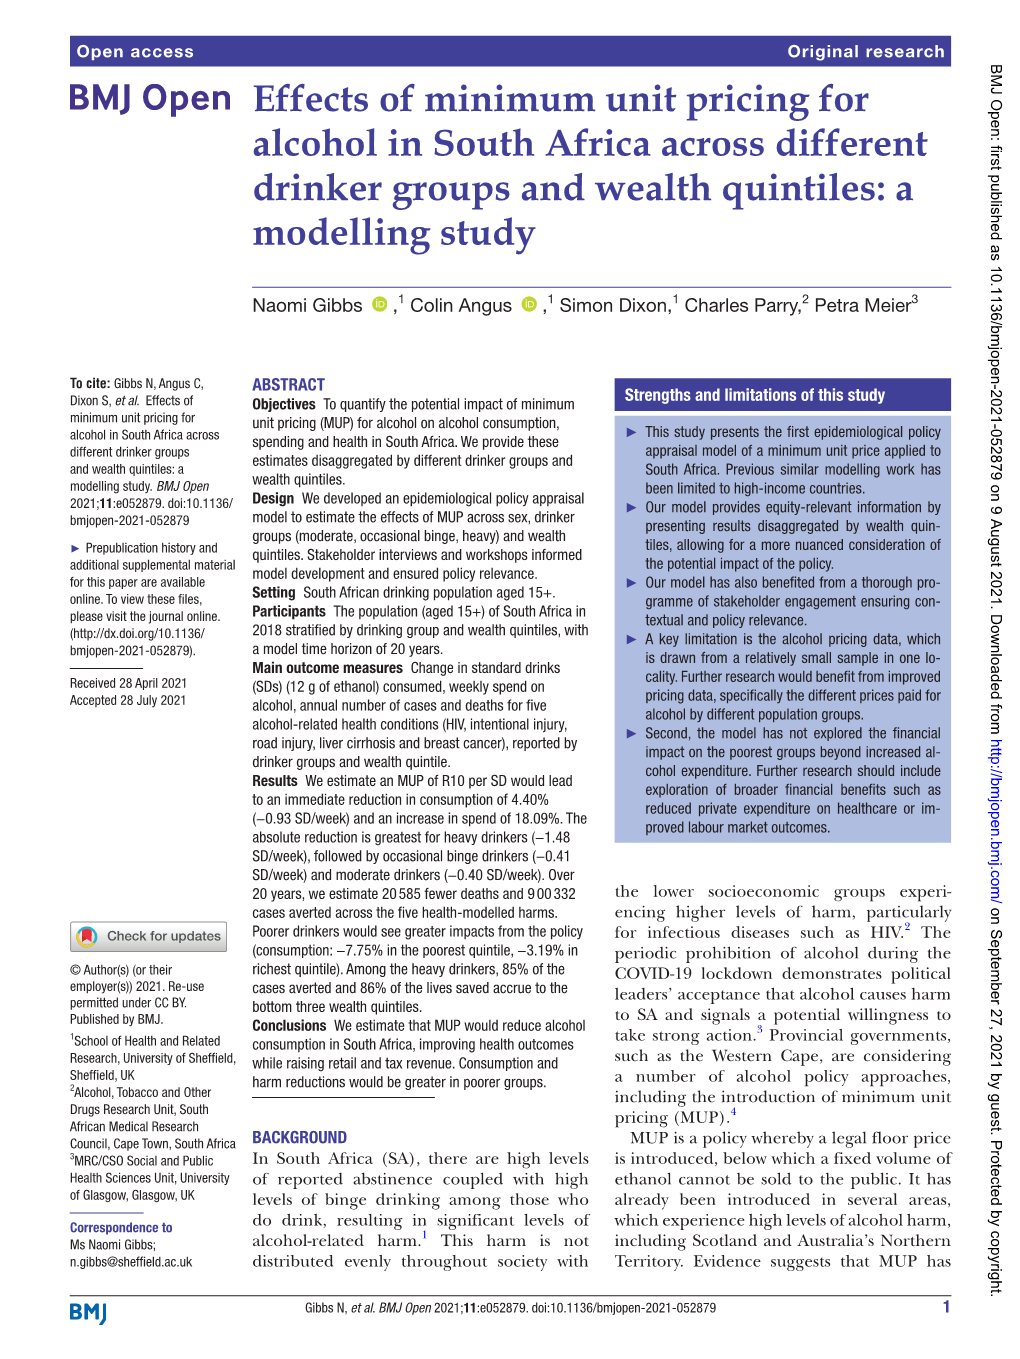 Effects of Minimum Unit Pricing for Alcohol in South Africa Across Different Drinker Groups and Wealth Quintiles: a Modelling Study